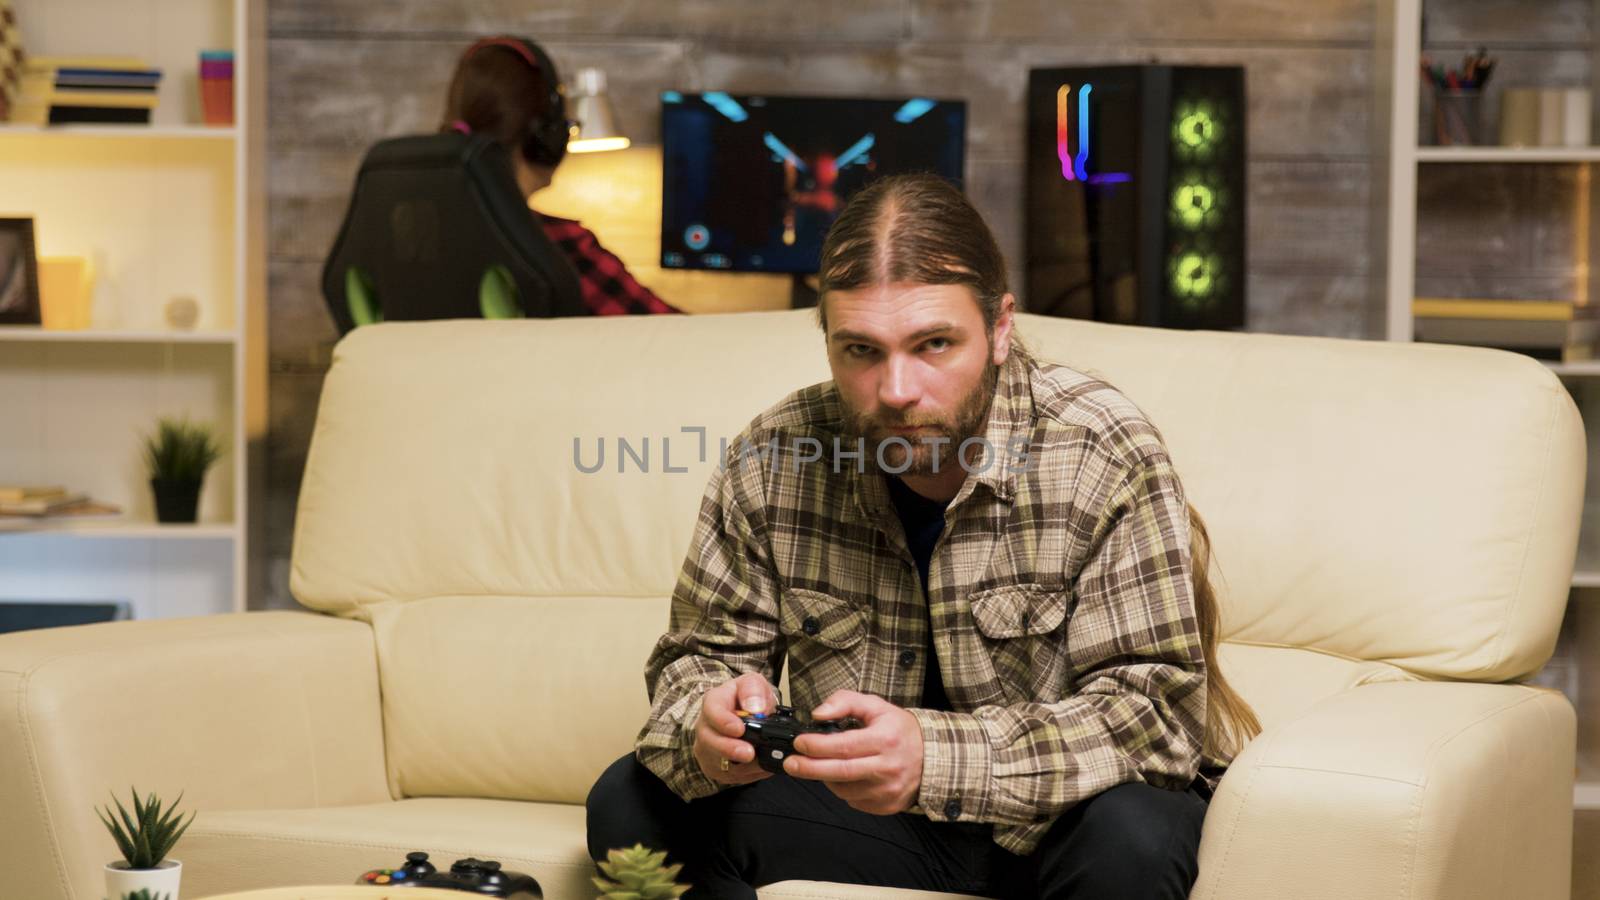 Focused bearded man sitting on couch playing video games using wireless controller. Girlfriend playing on computer in the background.